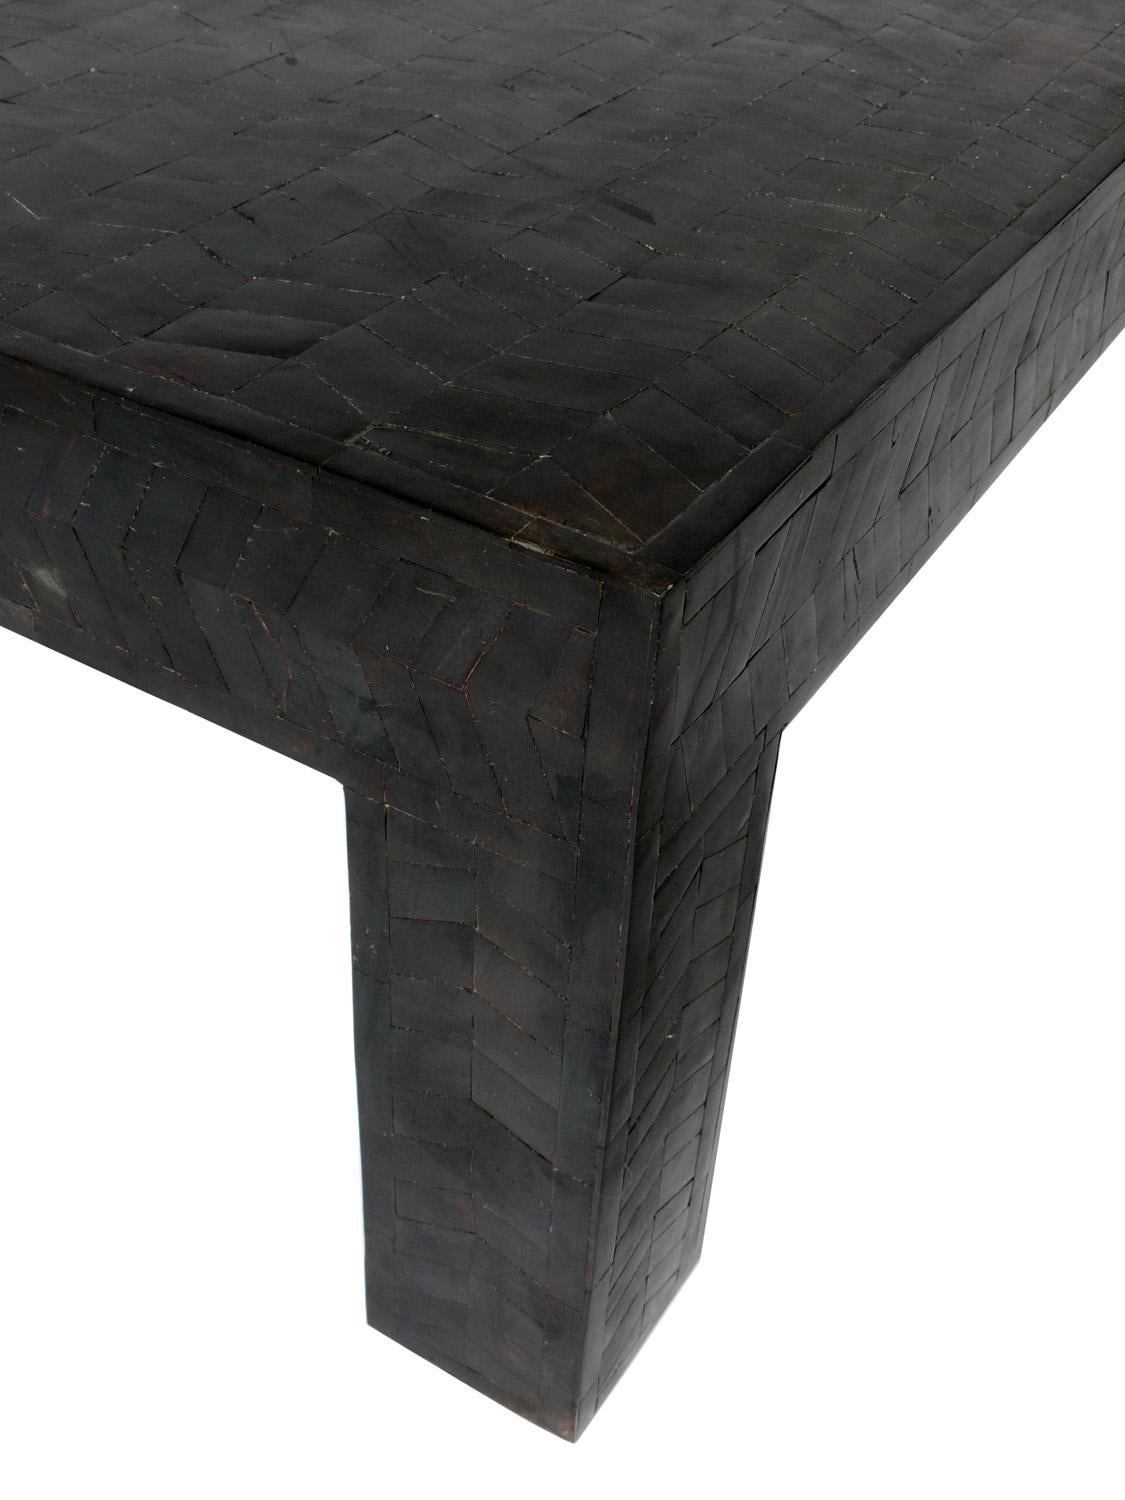 American Parquet Wood Inlaid Coffee Table